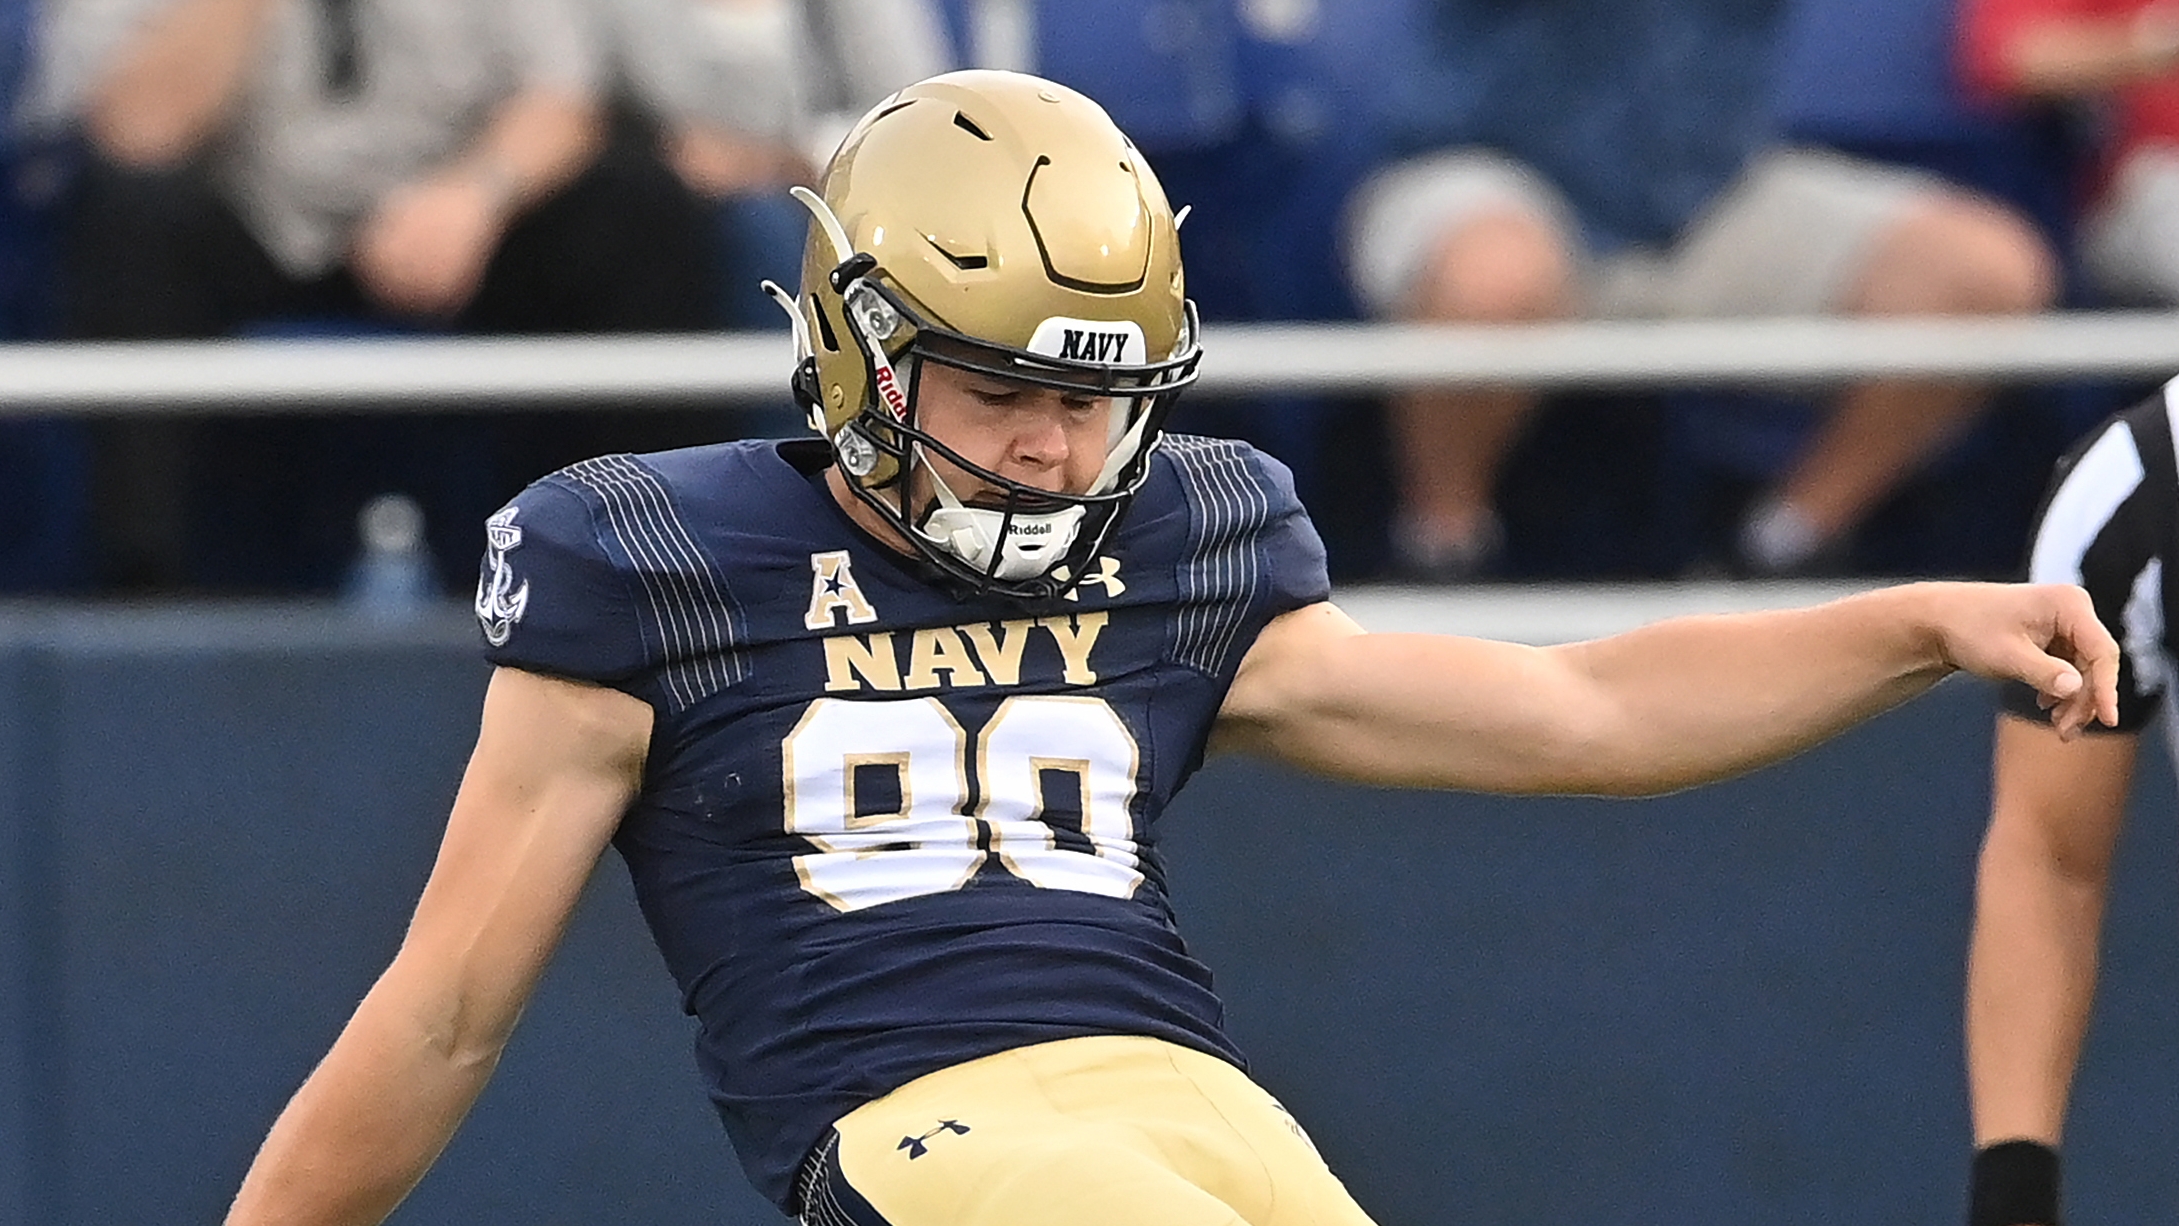 Navy unveils new alternate uniforms inspired by the Marines - Footballscoop